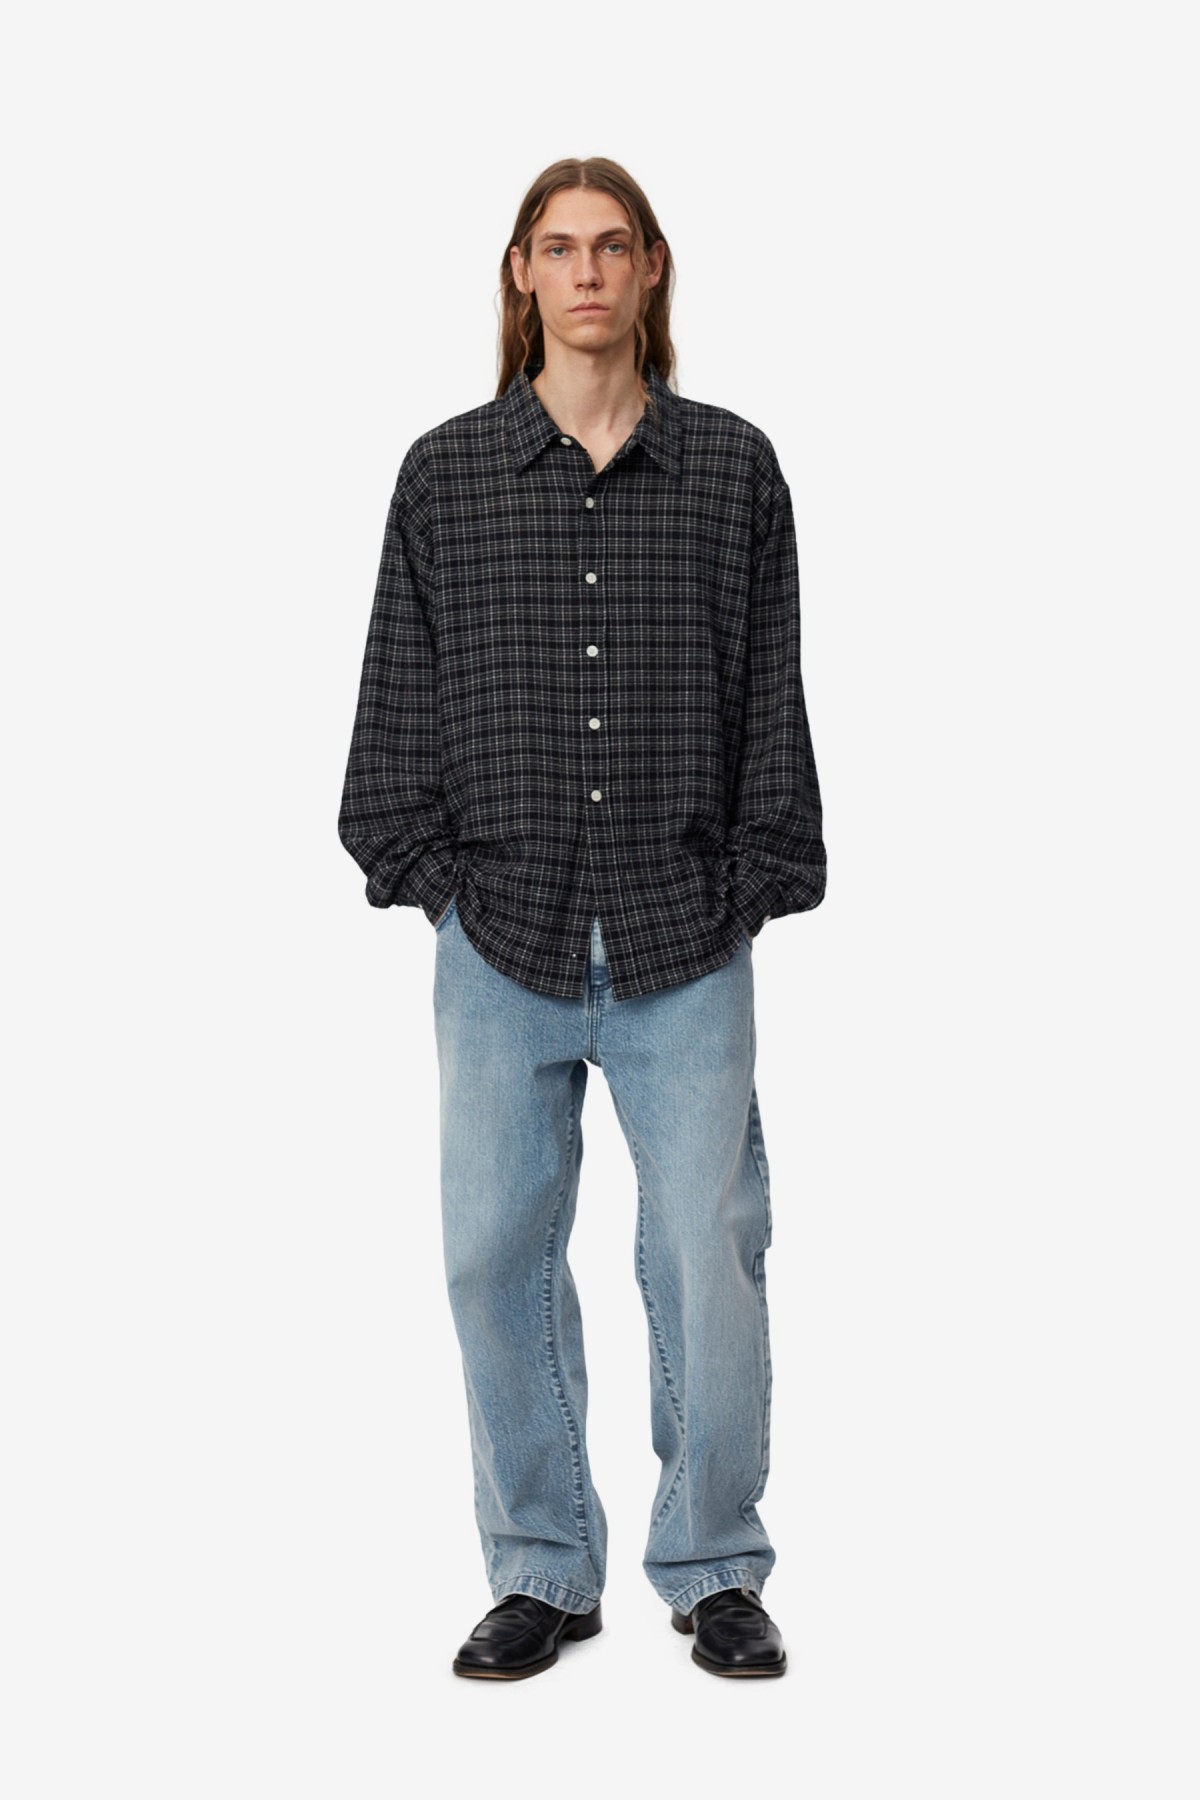 mfpen Vacation Shirt in Black Check